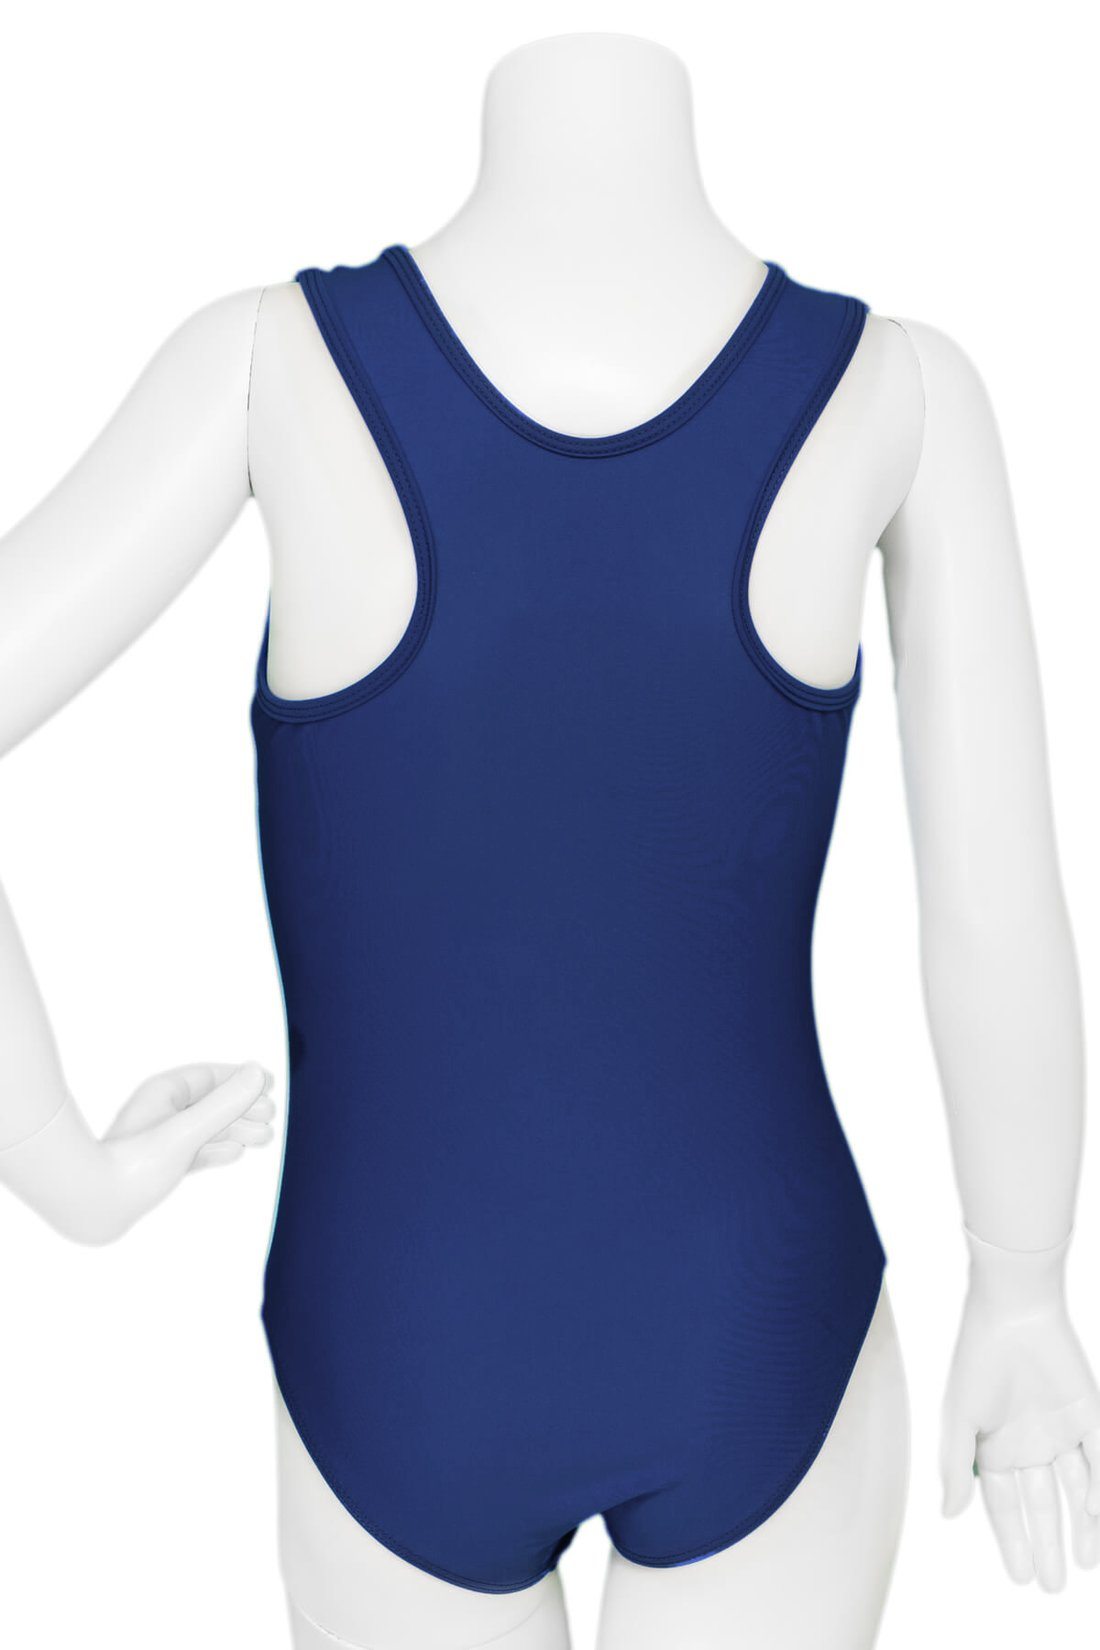 Gymnastics Leotard - Do It For You With Mesh Accents